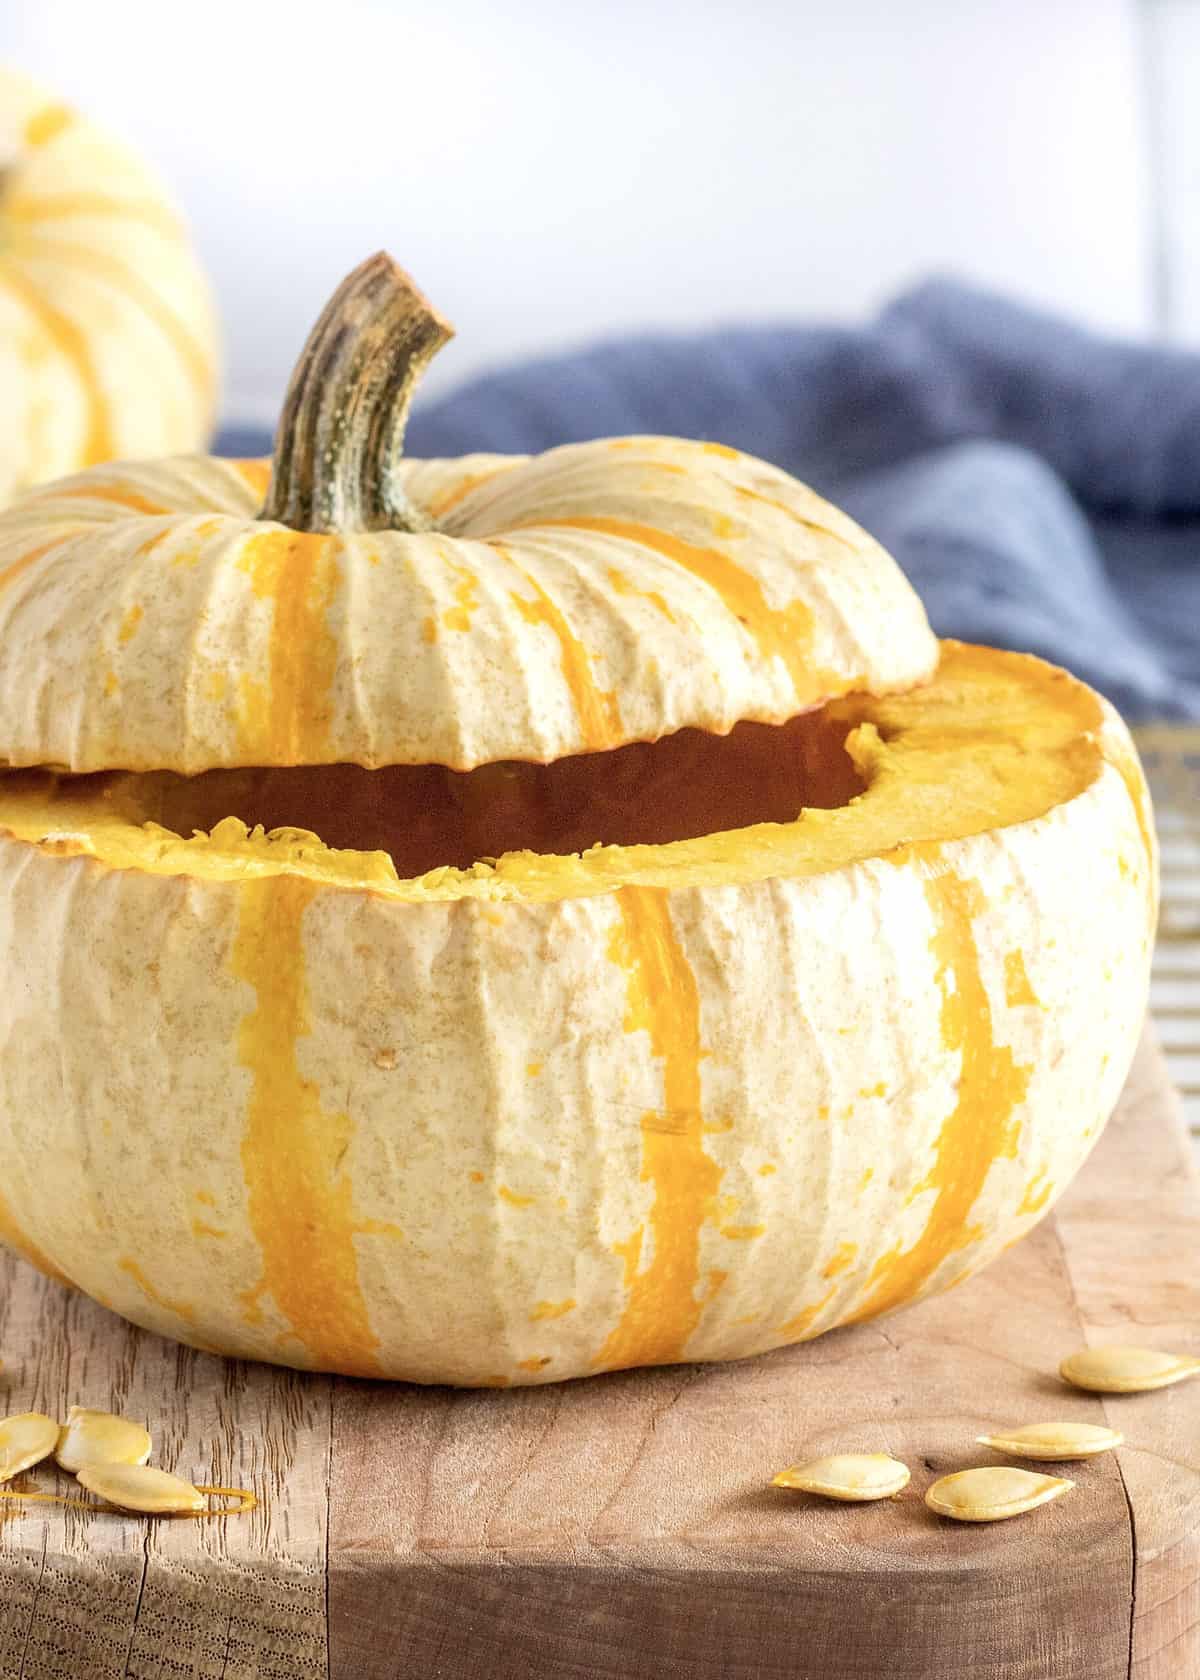 How to Bake a Pumpkin Bowl by The BakerMama